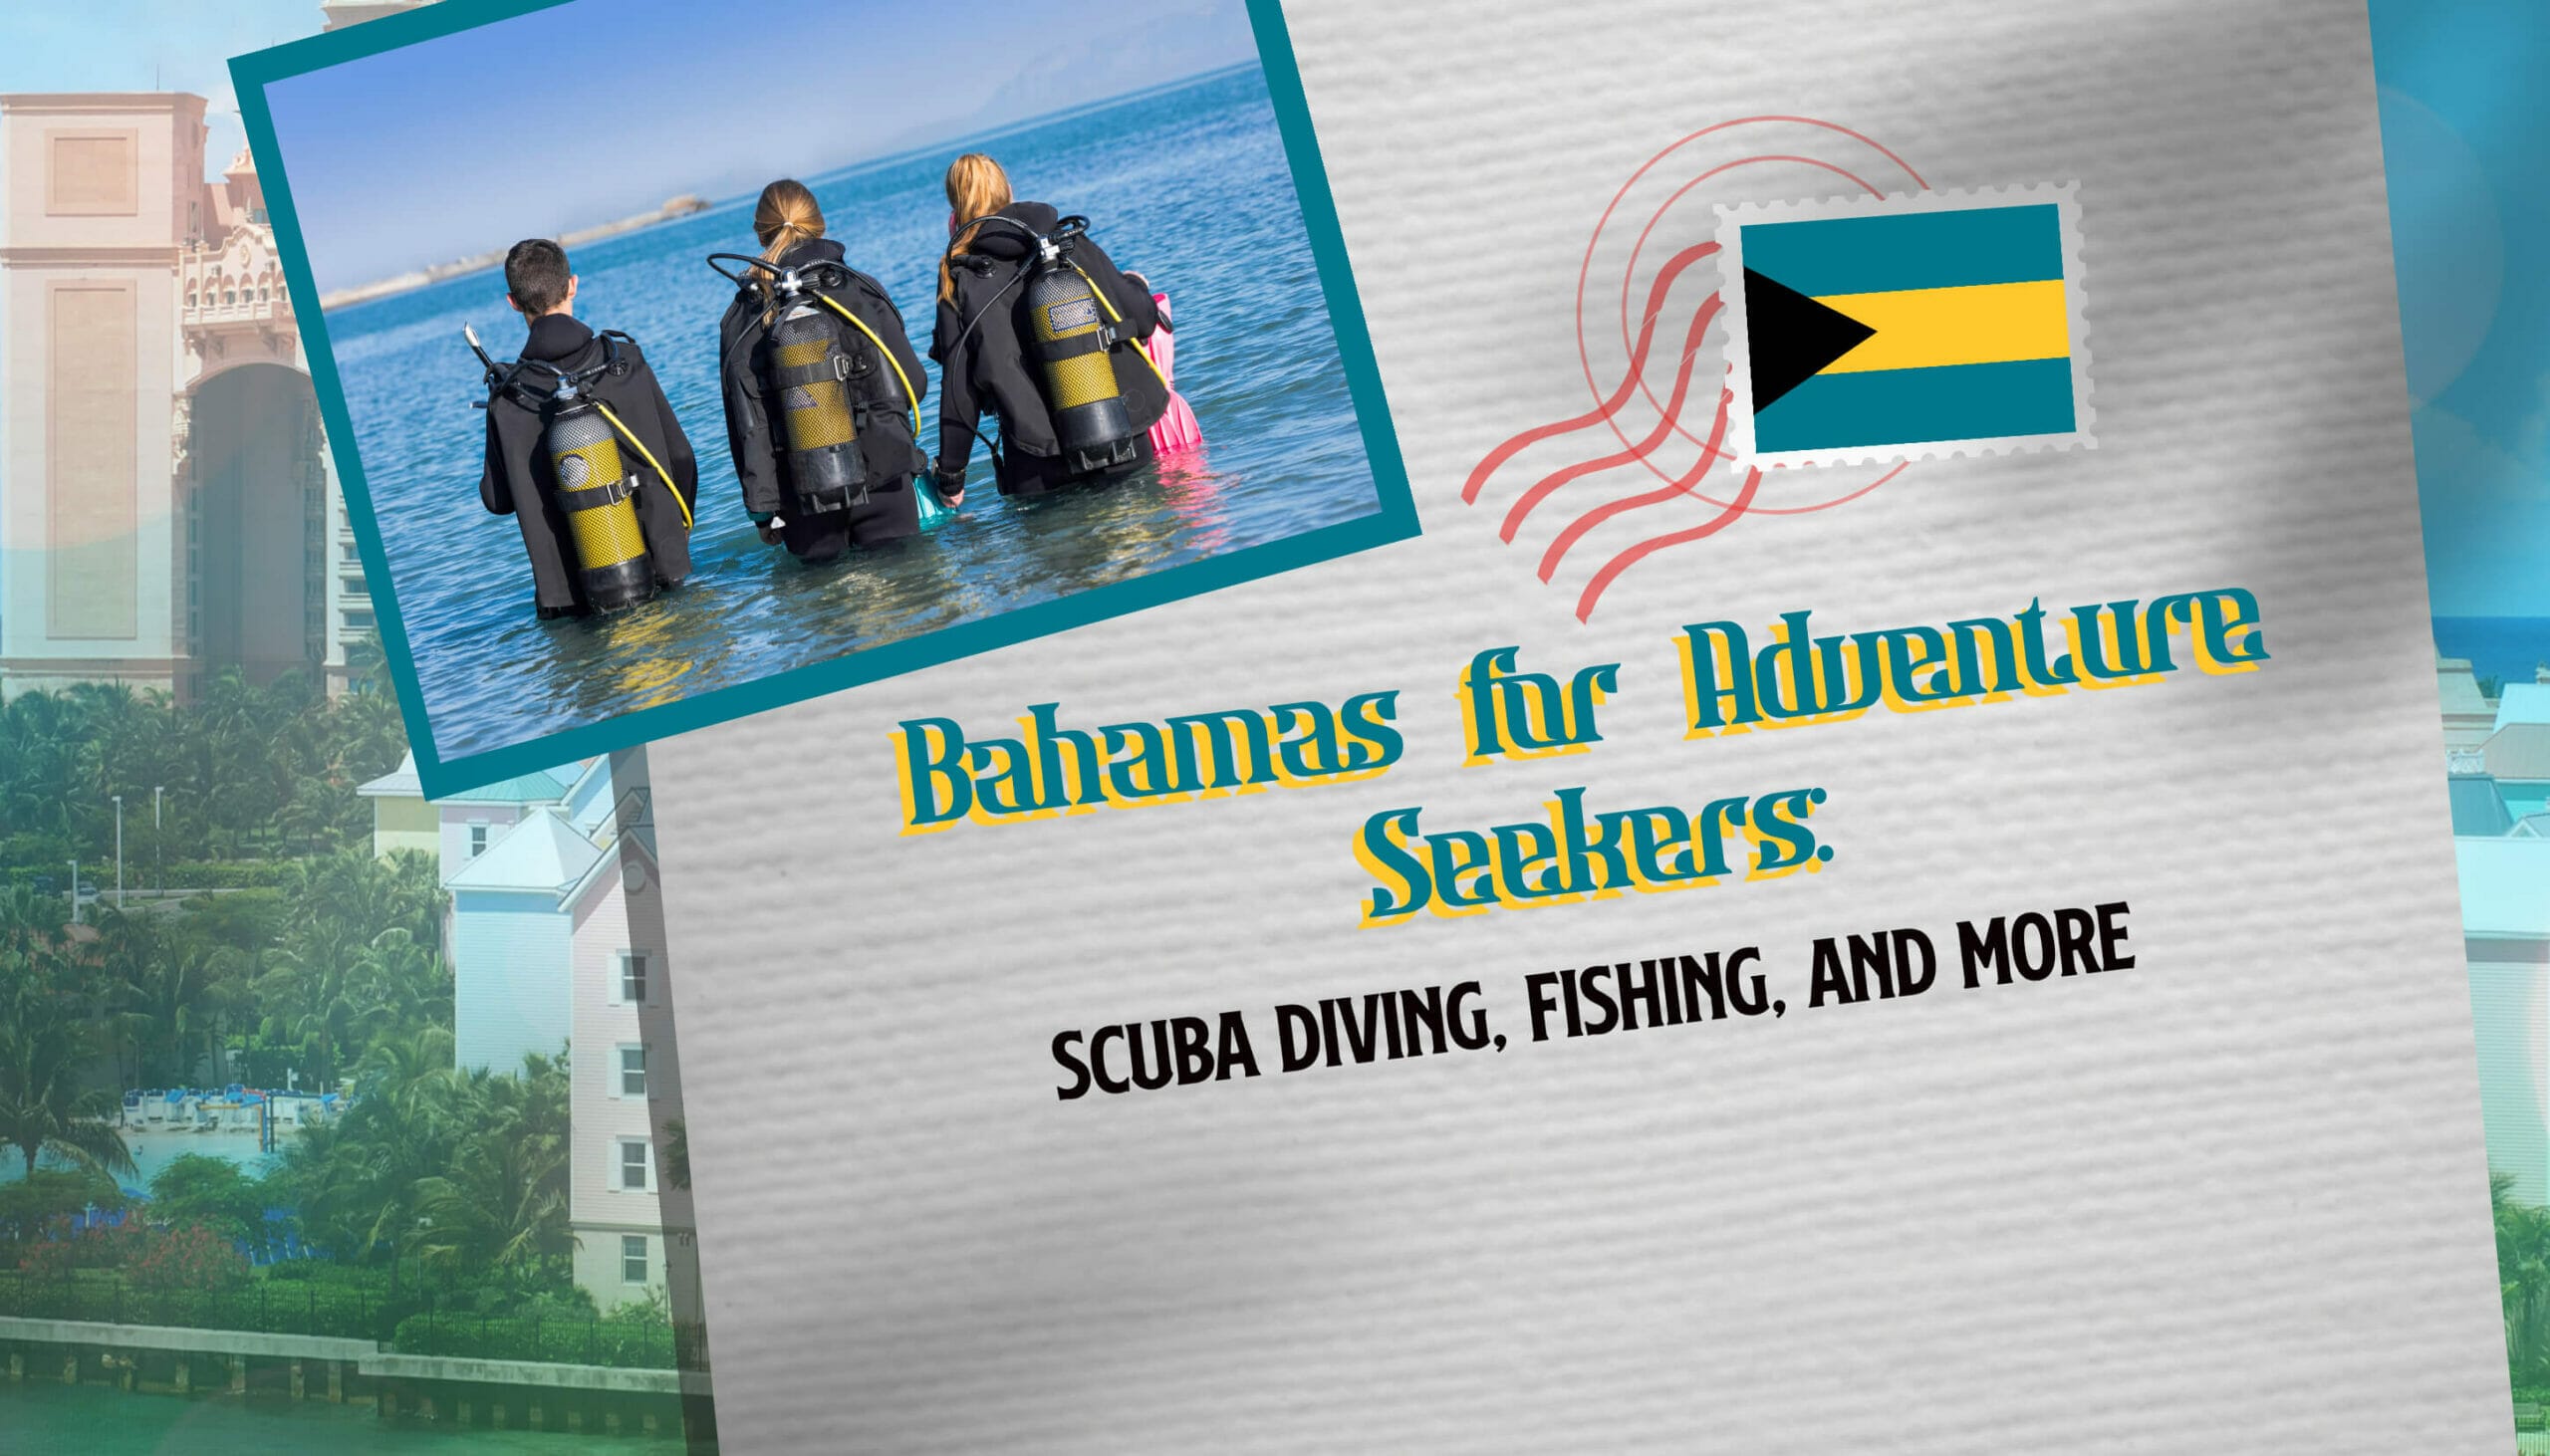 Bahamas for Adventure Seekers Scuba Diving, Fishing, and More